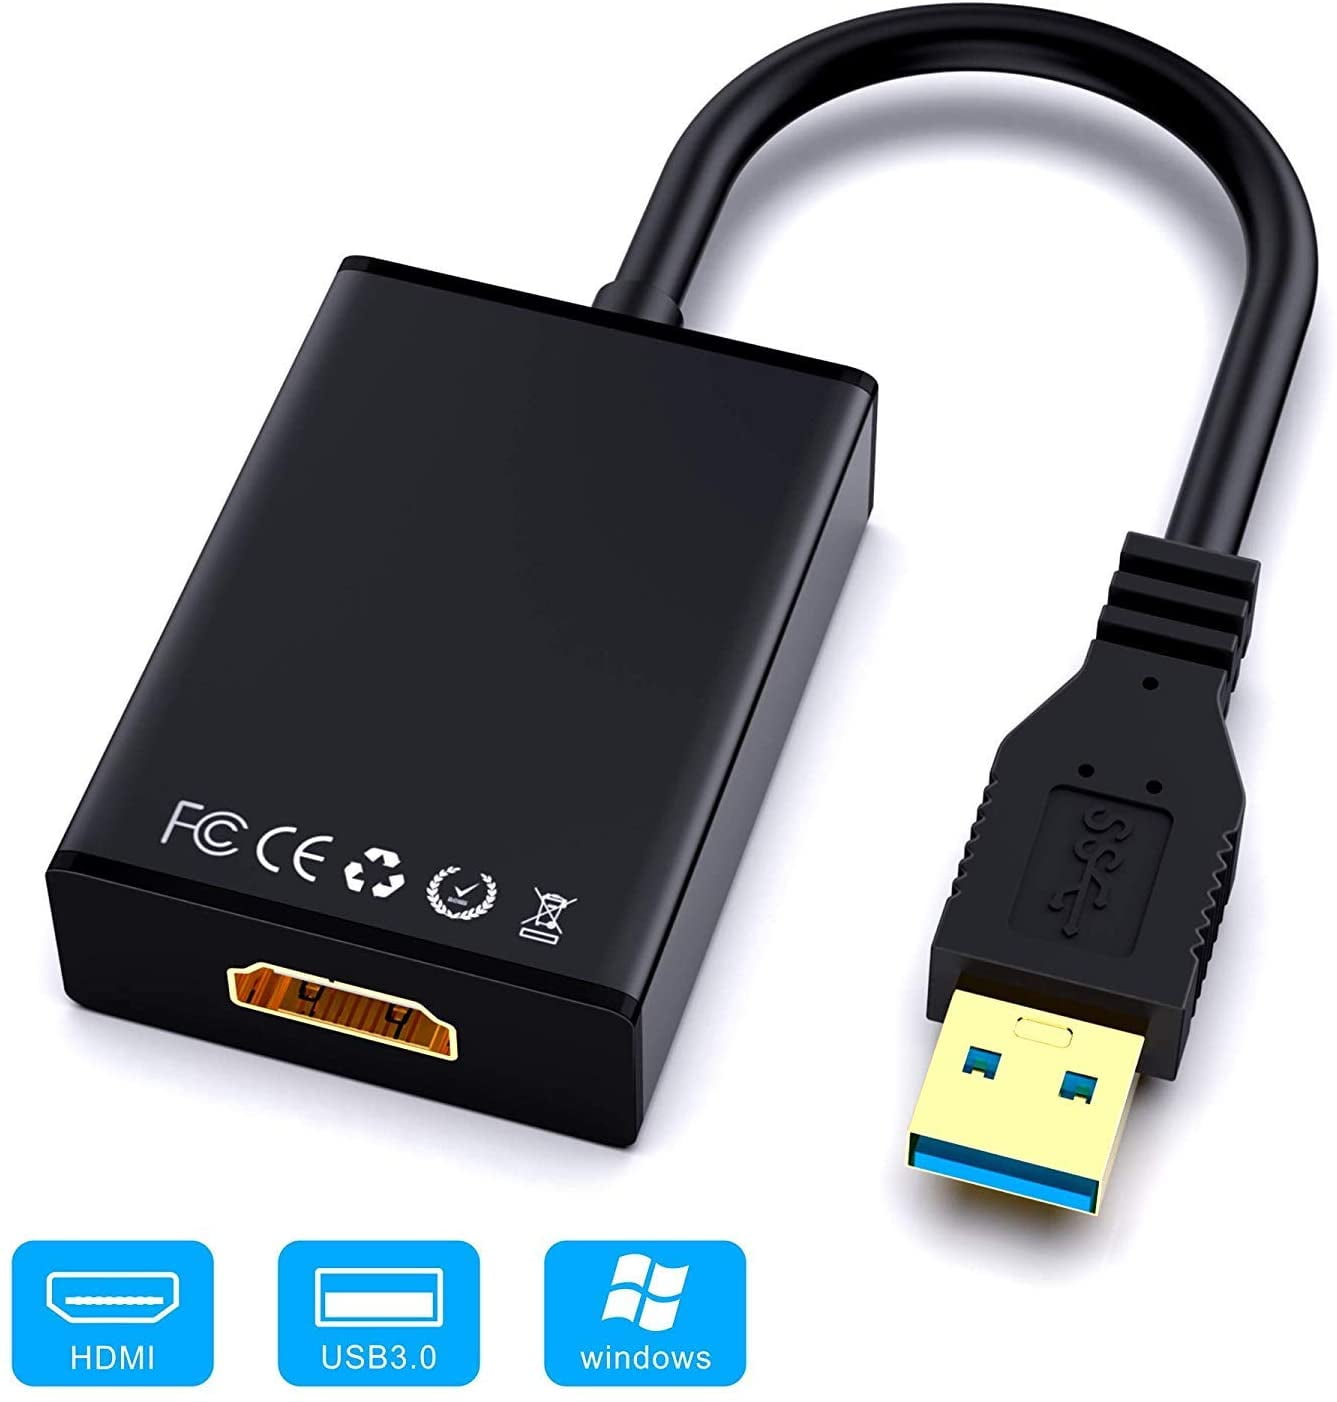 USB 3.0 to 1080P HDMI Audio Video Converter Cable Adapter Compatible with Windows 7/8/10 LAPUTA USB 3.0 to HDMI Adapter